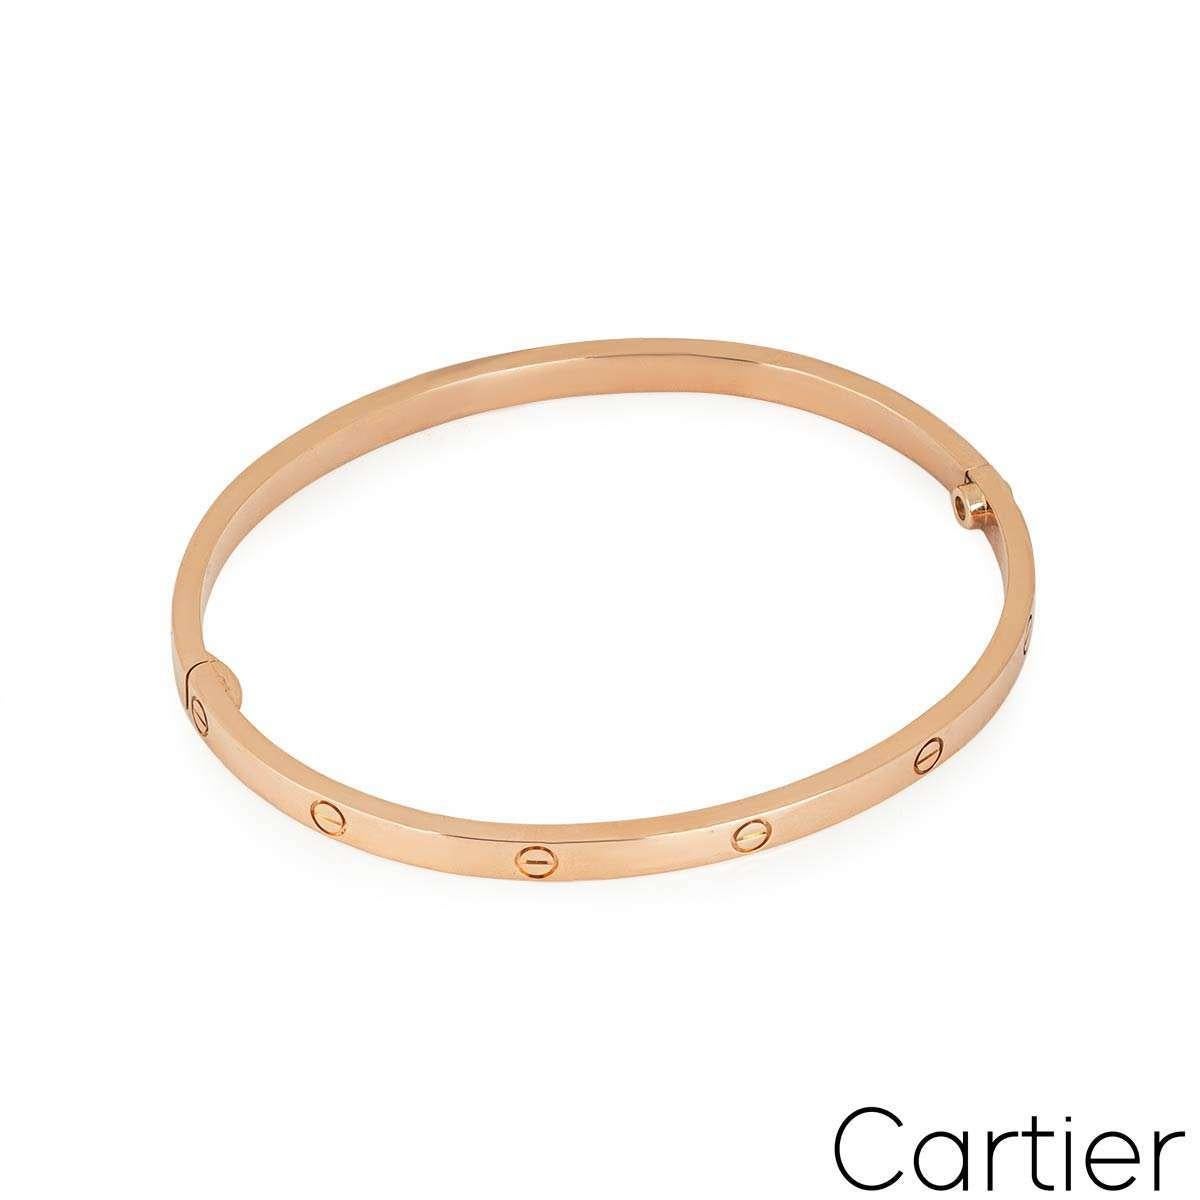 A Cartier bracelet in 18k rose gold from the Love collection. This smaller model of the classic Love bracelet comprises of the iconic Cartier screw motifs and features a single screw and hinge fitting. The bracelet is a size 15 and has a gross